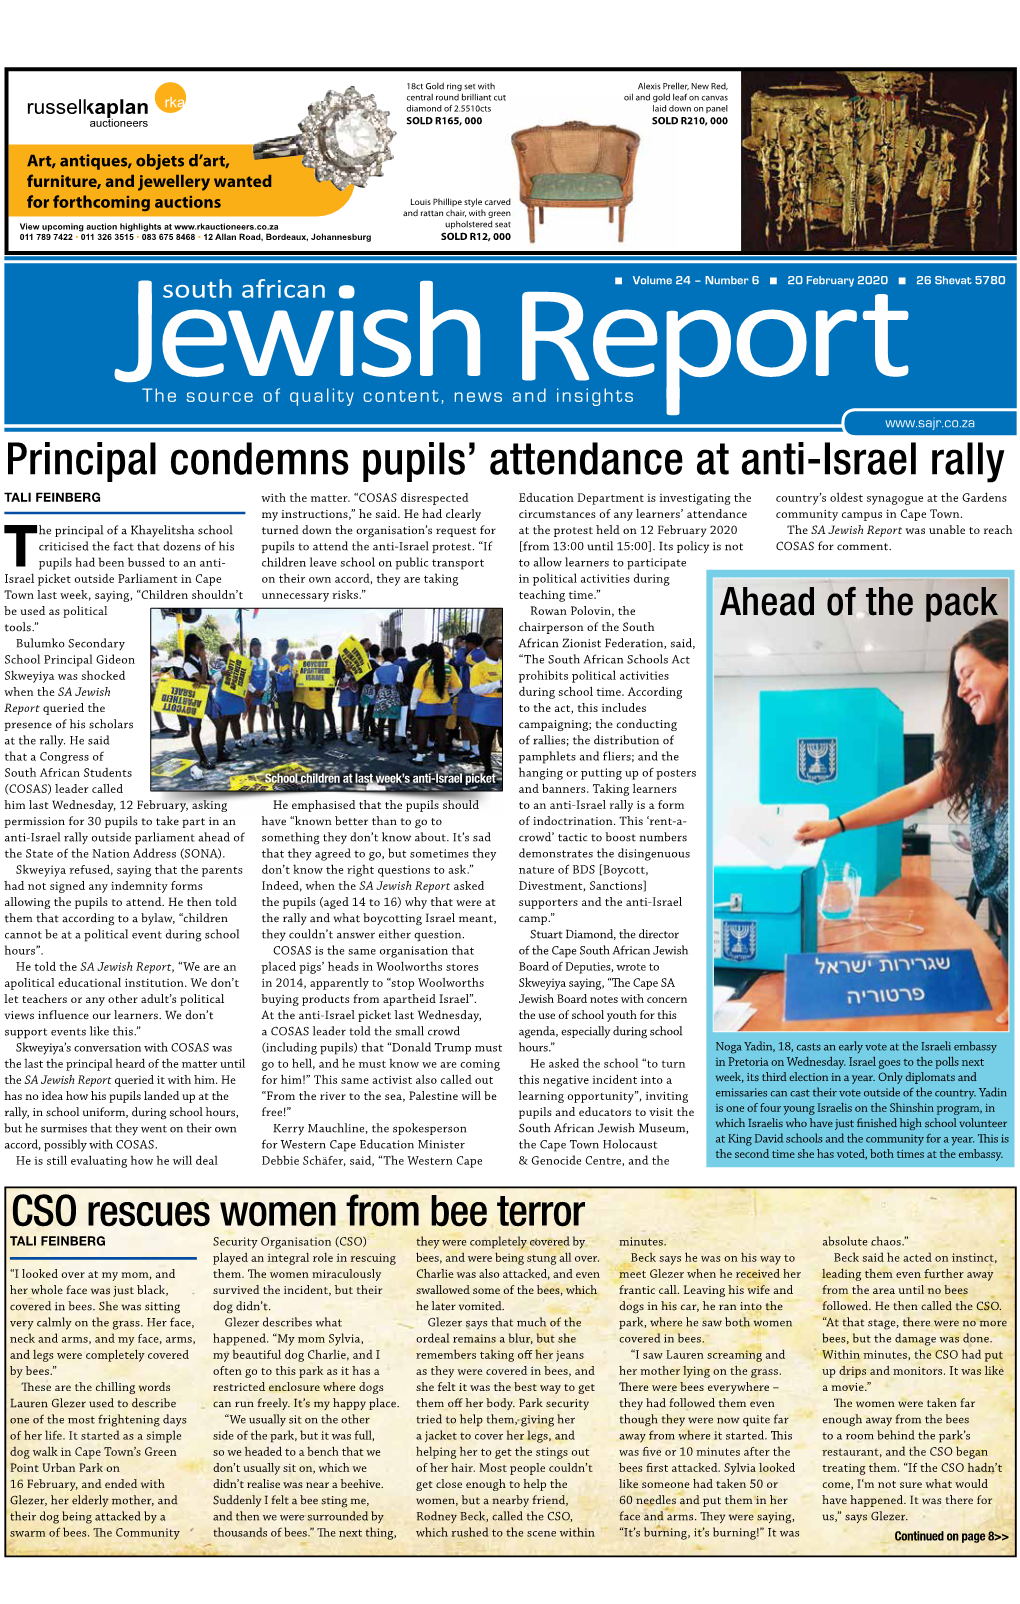 Condemns Pupils' Attendance at Anti-Israel Rally